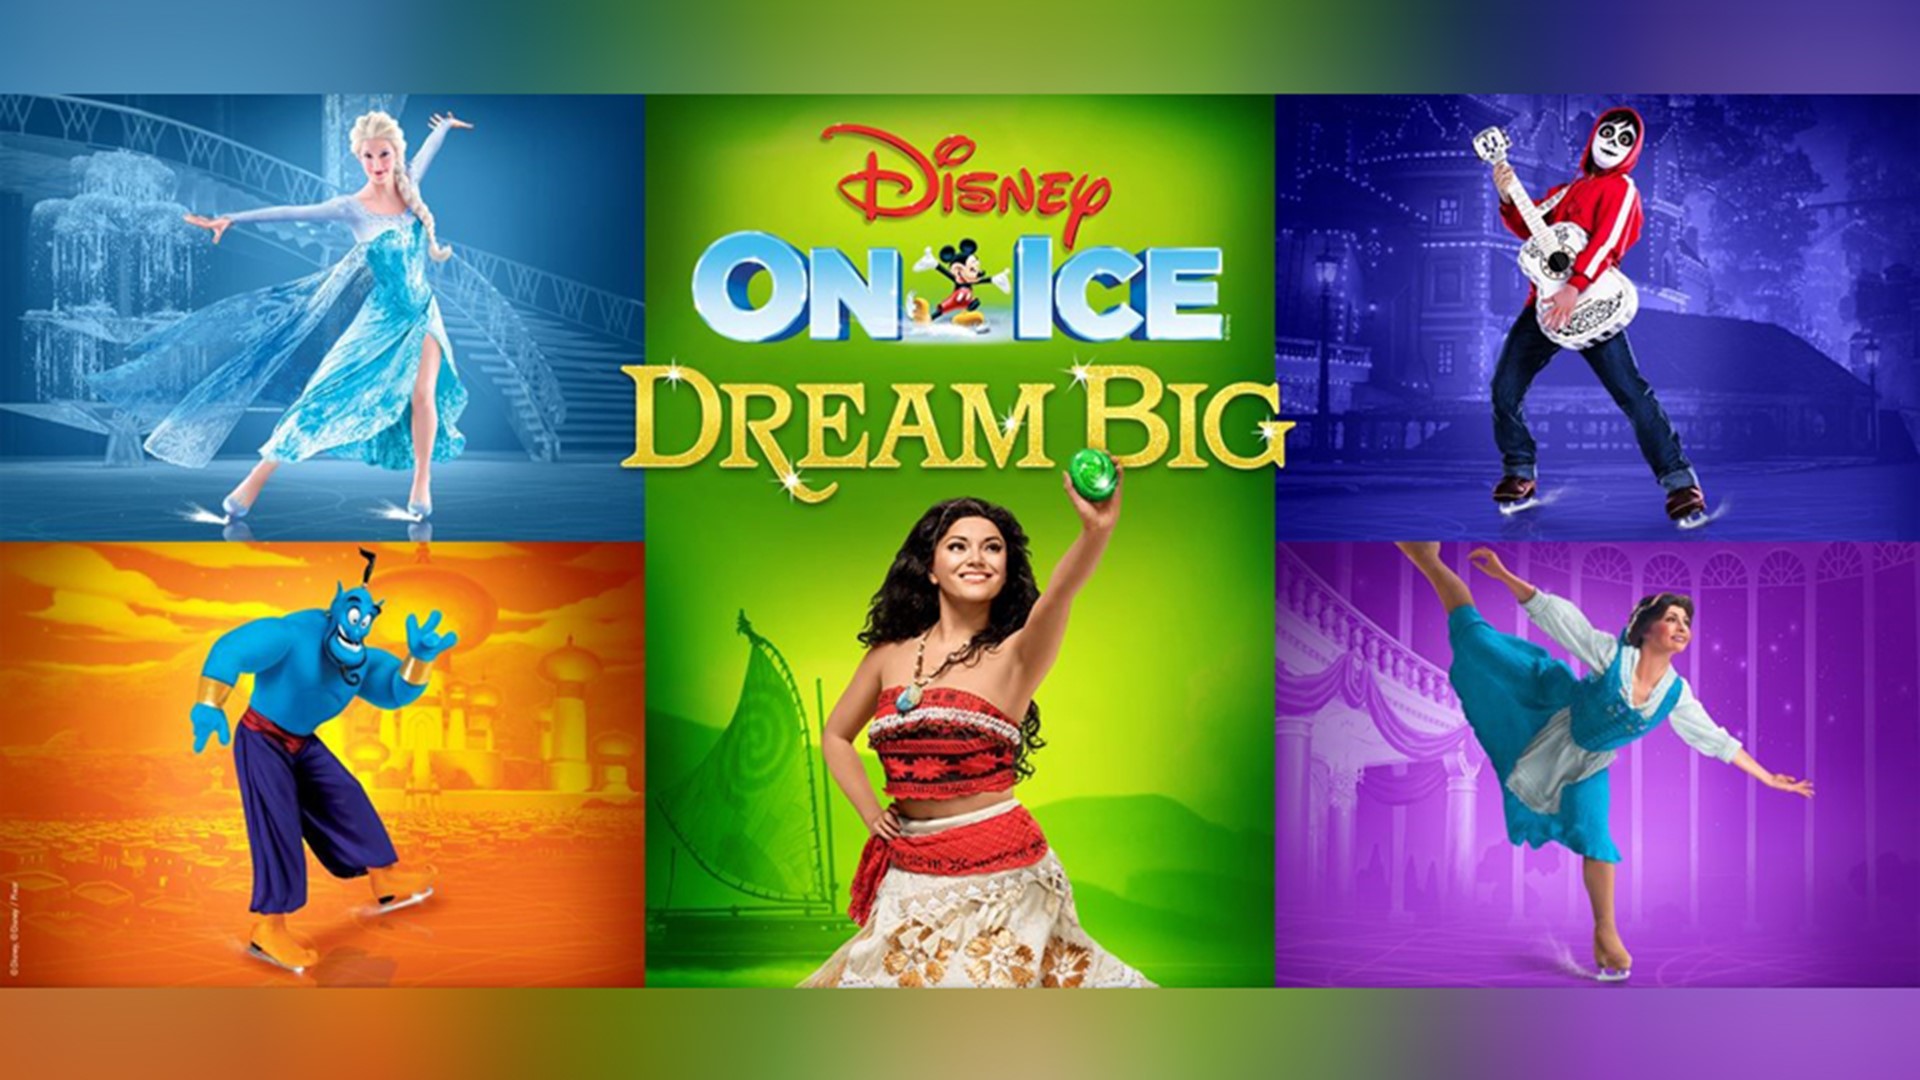 ‘Disney on Ice presents Dream Big’ coming to Nationwide Arena starting